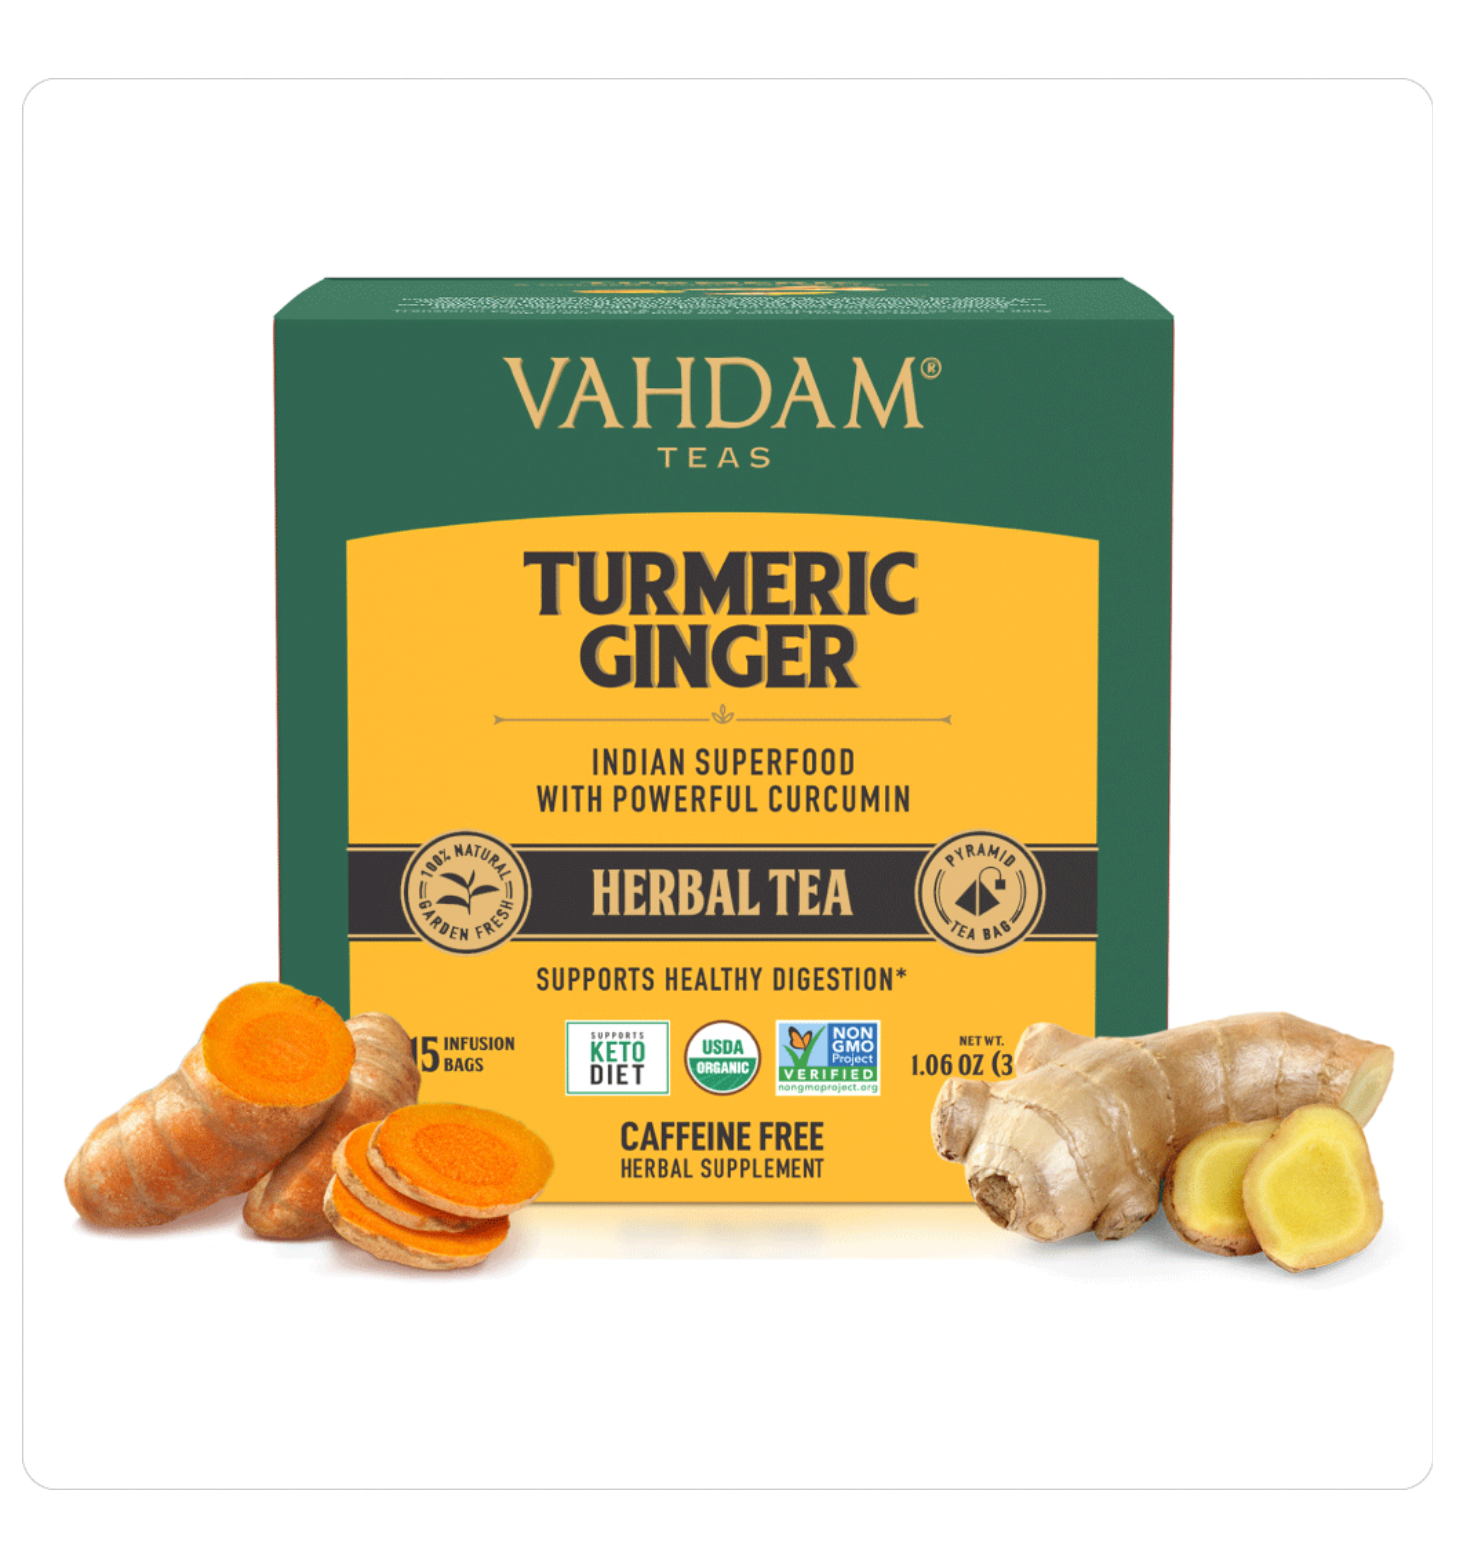 Tumeric Ginger Herbal Tea caffeine free support healthy digestion. Tea bags of Indian superfood with powerful curcumin 